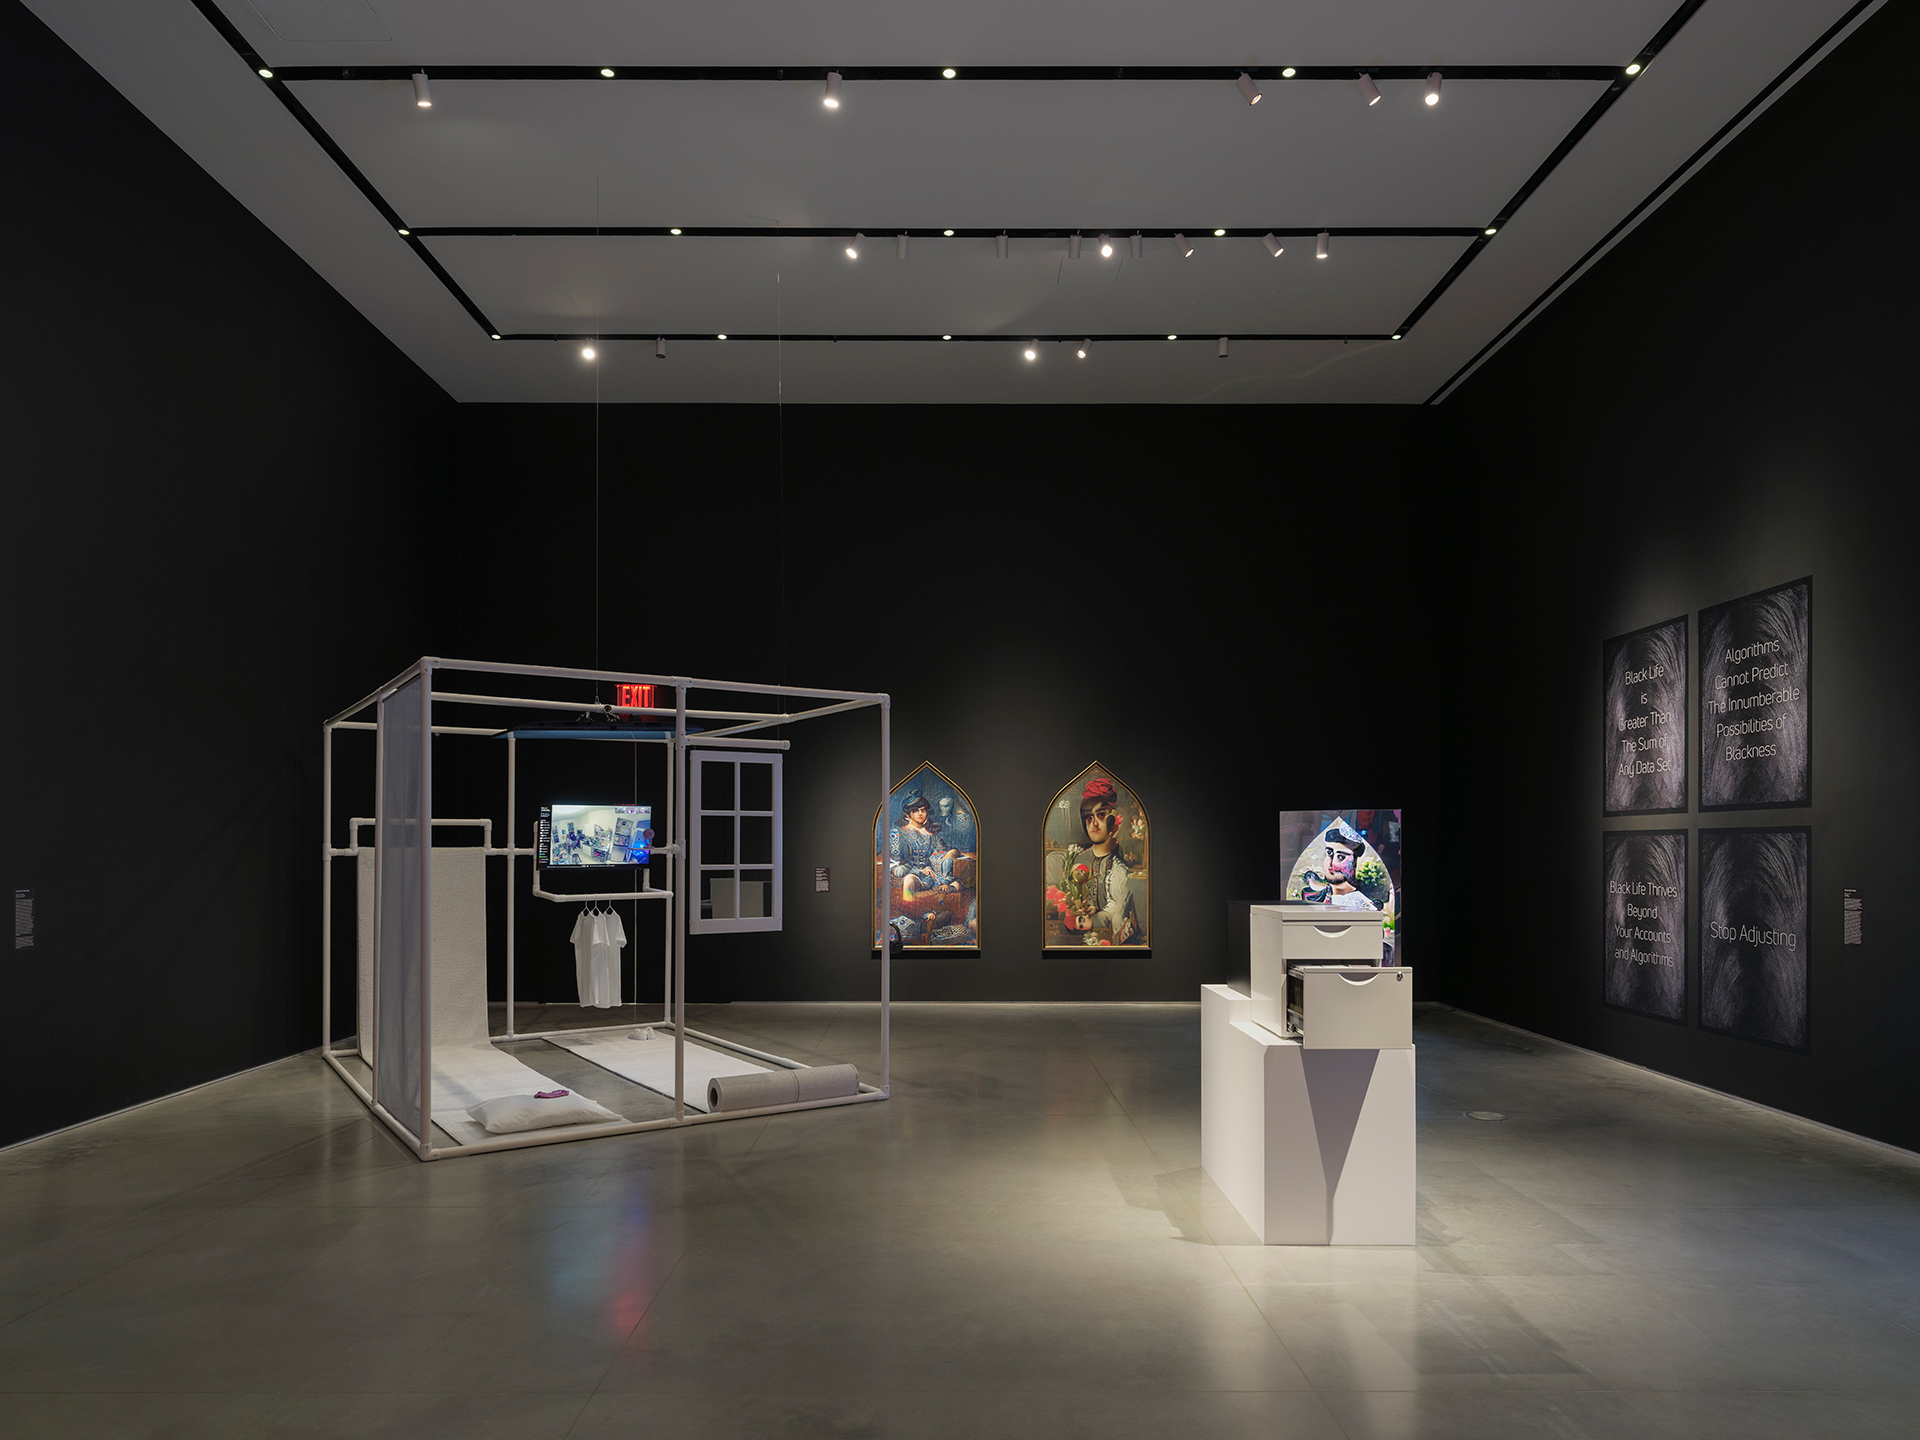 Gallery interior with black walls and a gray floor. There are artworks mounted on the back and left walls and two freestanding artworks in the center of the floor.